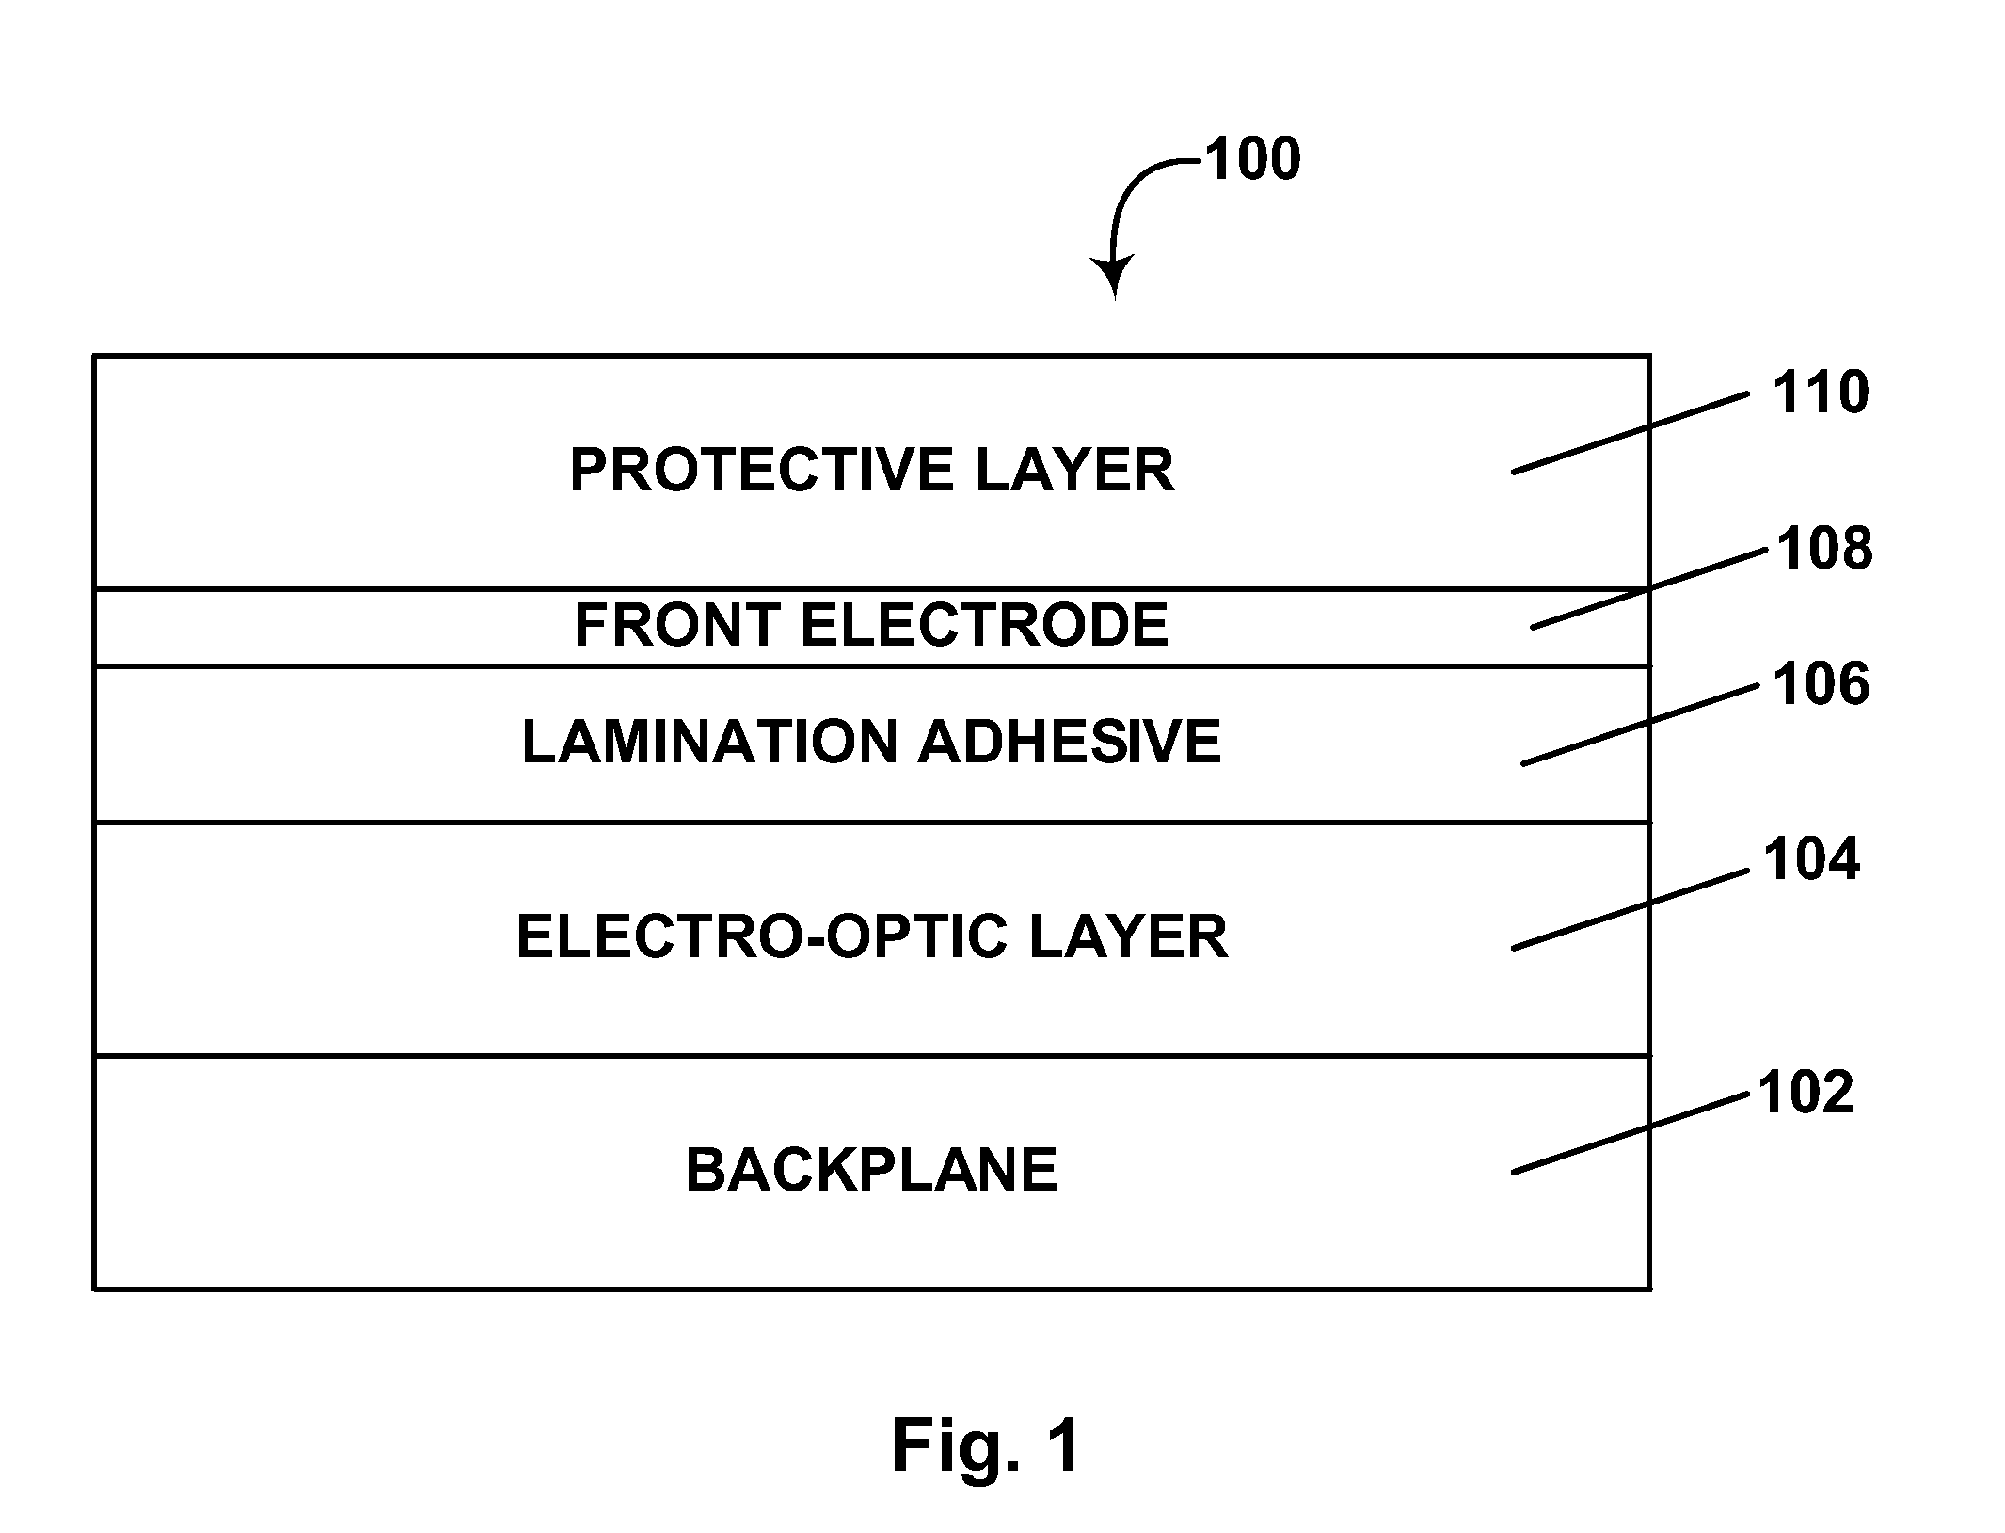 Components and methods for use in electro-optic displays